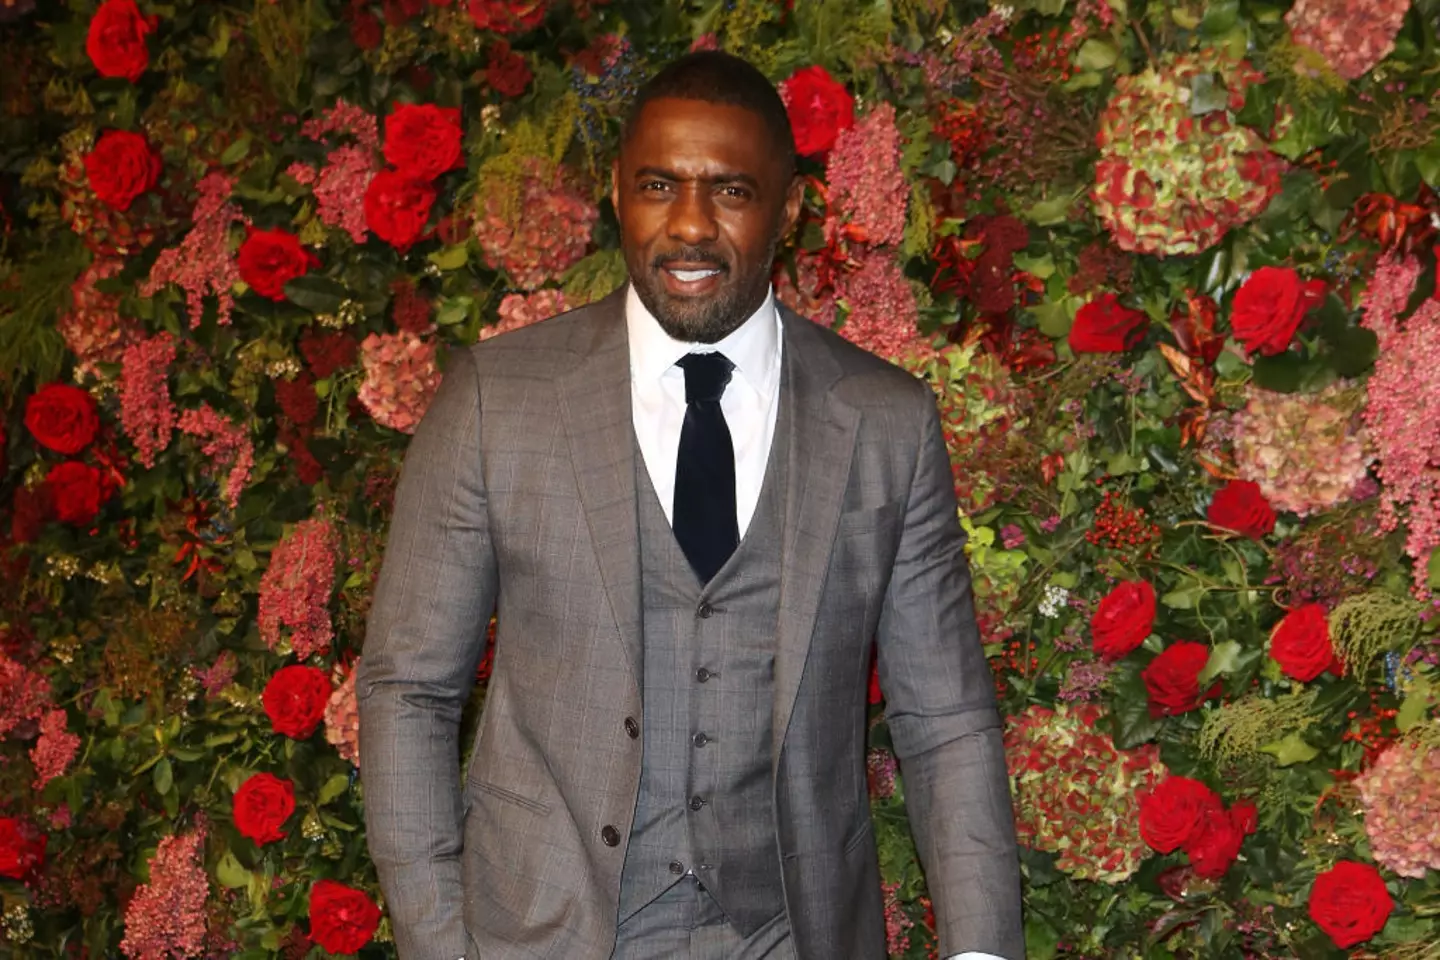 Idris Elba revealed how 'unhealthy habits' were starting to affect his well being.